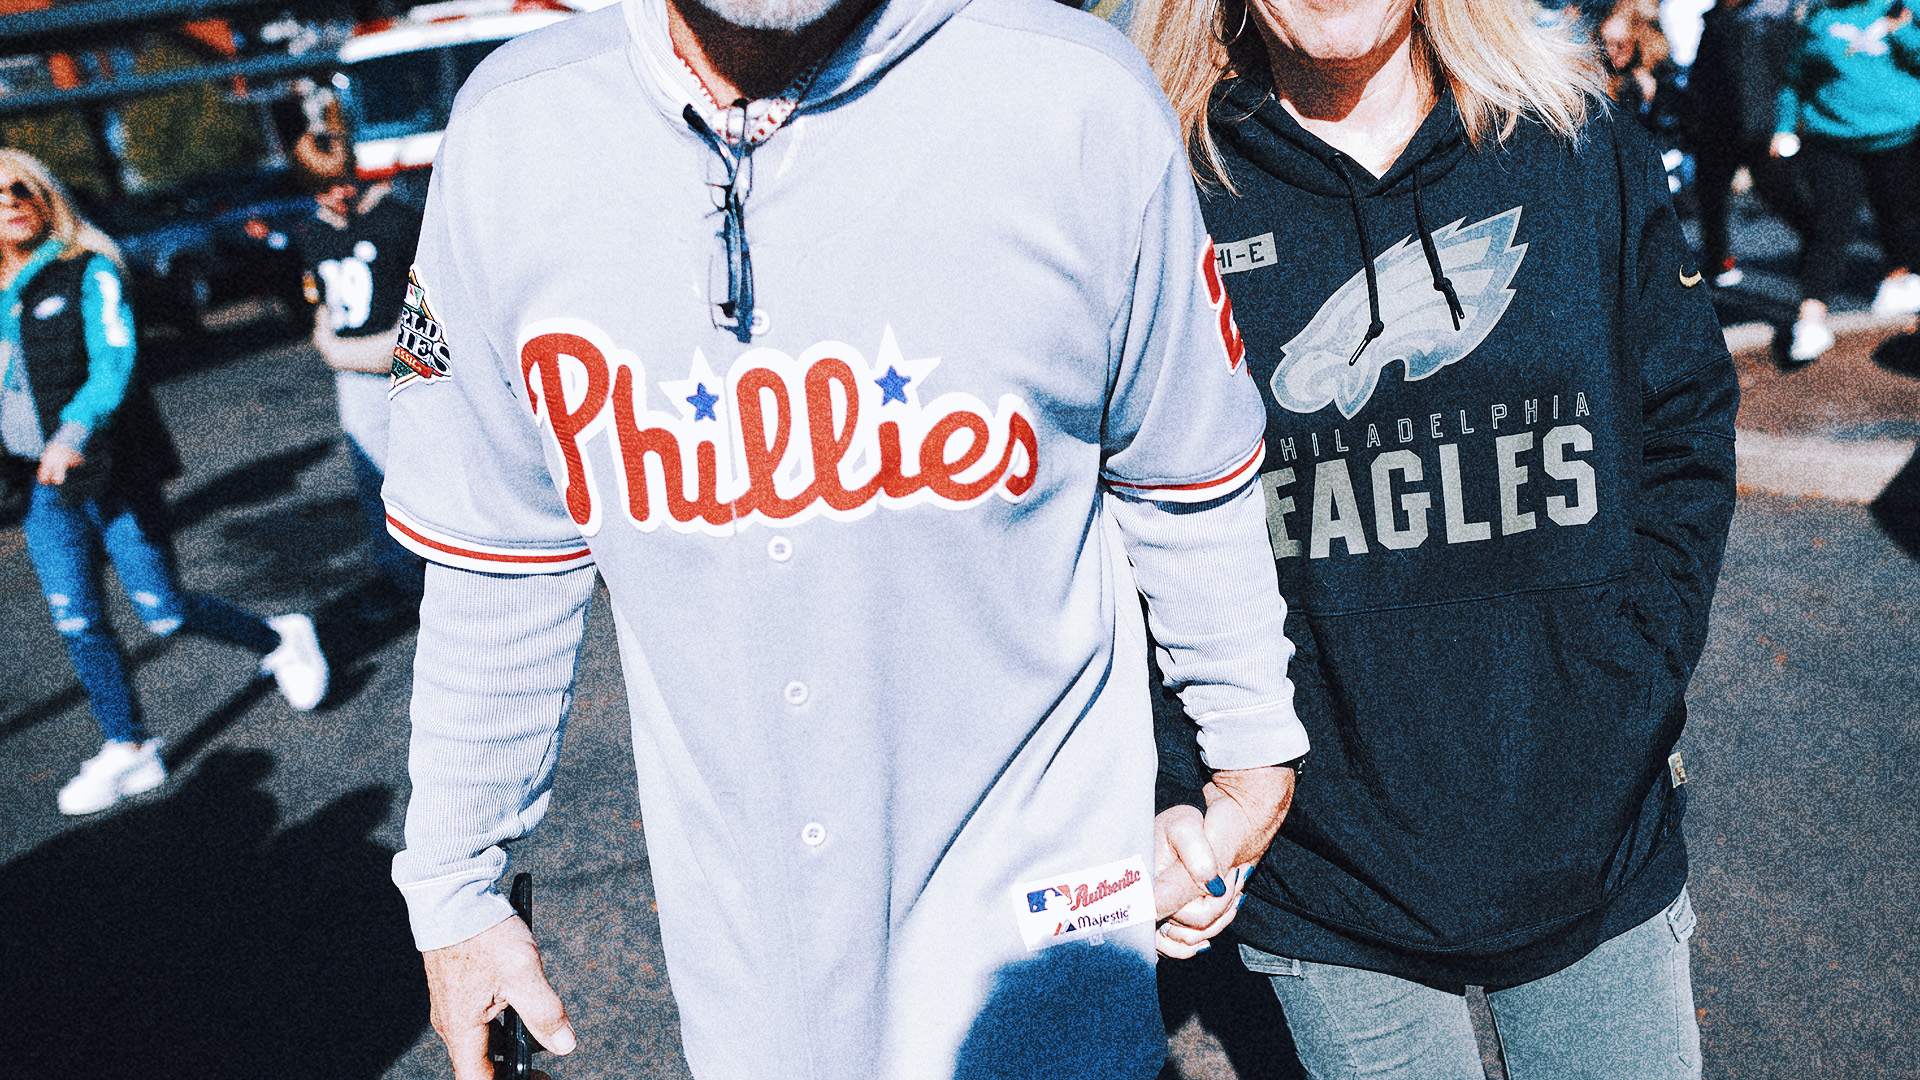 'It's a Philly thing': Eagles join Phillies, Union in reaching championship